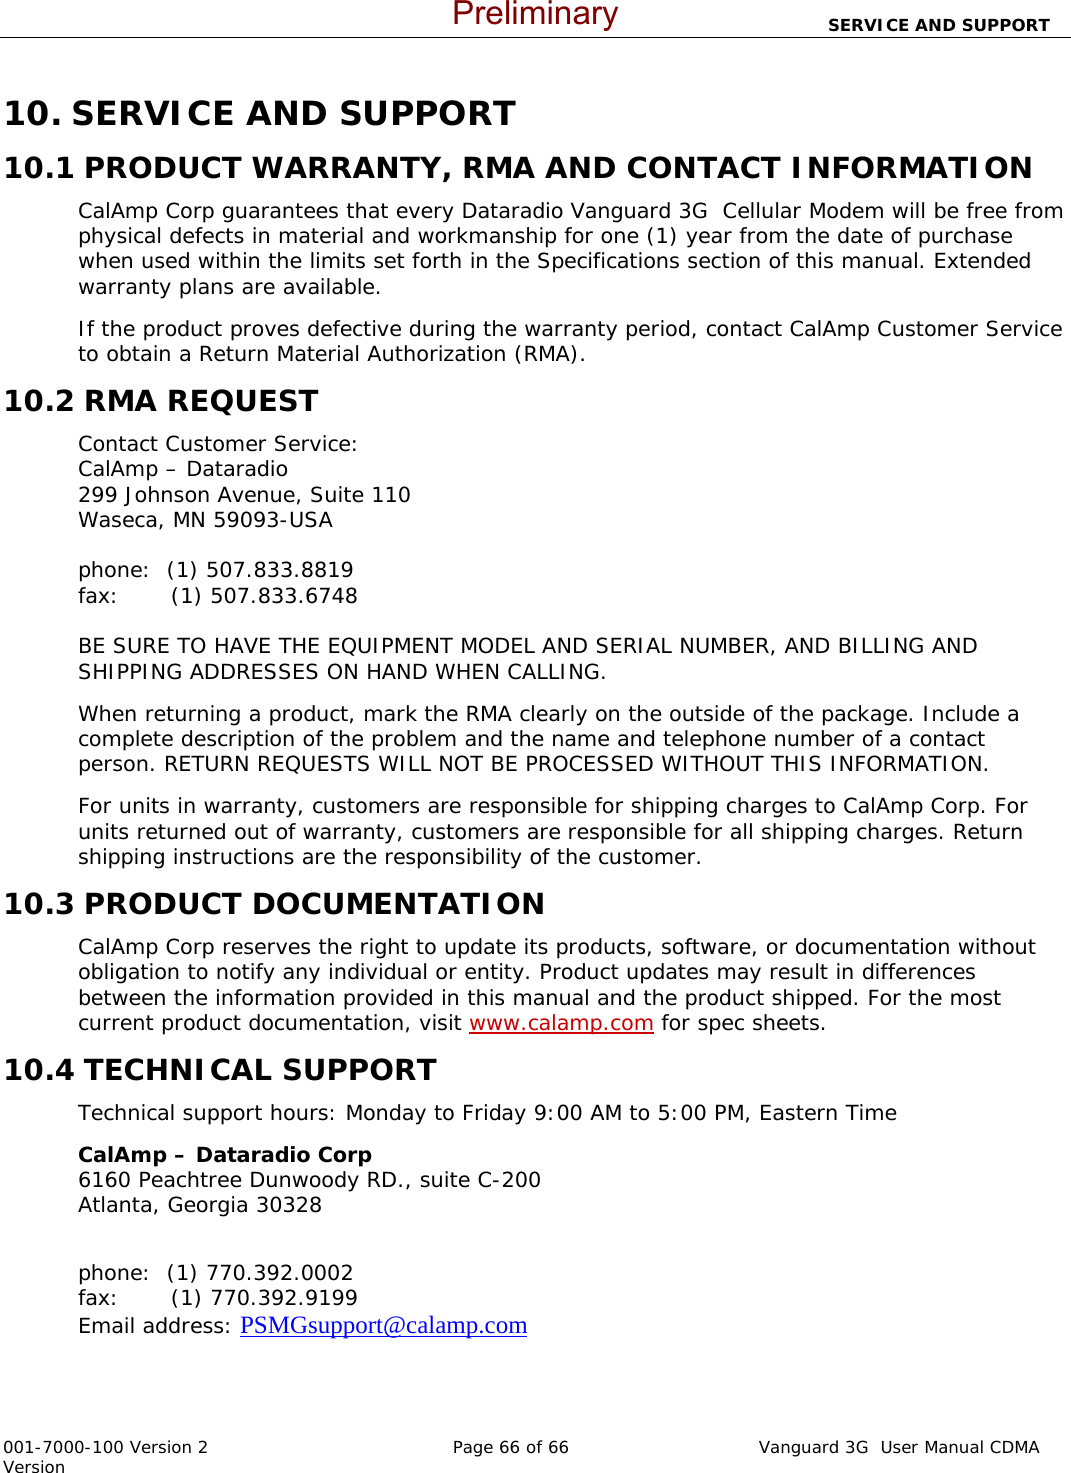                                SERVICE AND SUPPORT  001-7000-100 Version 2       Page 66 of 66       Vanguard 3G  User Manual CDMA Version 10. SERVICE AND SUPPORT 10.1 PRODUCT WARRANTY, RMA AND CONTACT INFORMATION CalAmp Corp guarantees that every Dataradio Vanguard 3G  Cellular Modem will be free from physical defects in material and workmanship for one (1) year from the date of purchase when used within the limits set forth in the Specifications section of this manual. Extended warranty plans are available.  If the product proves defective during the warranty period, contact CalAmp Customer Service to obtain a Return Material Authorization (RMA).  10.2 RMA REQUEST Contact Customer Service: CalAmp – Dataradio  299 Johnson Avenue, Suite 110 Waseca, MN 59093-USA  phone:  (1) 507.833.8819                                                                                           fax:       (1) 507.833.6748                                                                                                     BE SURE TO HAVE THE EQUIPMENT MODEL AND SERIAL NUMBER, AND BILLING AND SHIPPING ADDRESSES ON HAND WHEN CALLING.  When returning a product, mark the RMA clearly on the outside of the package. Include a complete description of the problem and the name and telephone number of a contact person. RETURN REQUESTS WILL NOT BE PROCESSED WITHOUT THIS INFORMATION. For units in warranty, customers are responsible for shipping charges to CalAmp Corp. For units returned out of warranty, customers are responsible for all shipping charges. Return shipping instructions are the responsibility of the customer. 10.3 PRODUCT DOCUMENTATION CalAmp Corp reserves the right to update its products, software, or documentation without obligation to notify any individual or entity. Product updates may result in differences between the information provided in this manual and the product shipped. For the most current product documentation, visit www.calamp.com for spec sheets. 10.4 TECHNICAL SUPPORT Technical support hours: Monday to Friday 9:00 AM to 5:00 PM, Eastern Time CalAmp – Dataradio Corp                                                                                             6160 Peachtree Dunwoody RD., suite C-200                                                                           Atlanta, Georgia 30328                                                                                                                                      phone:  (1) 770.392.0002                                                                                            fax:       (1) 770.392.9199                                                                                                   Email address: PSMGsupport@calamp.com     Preliminary